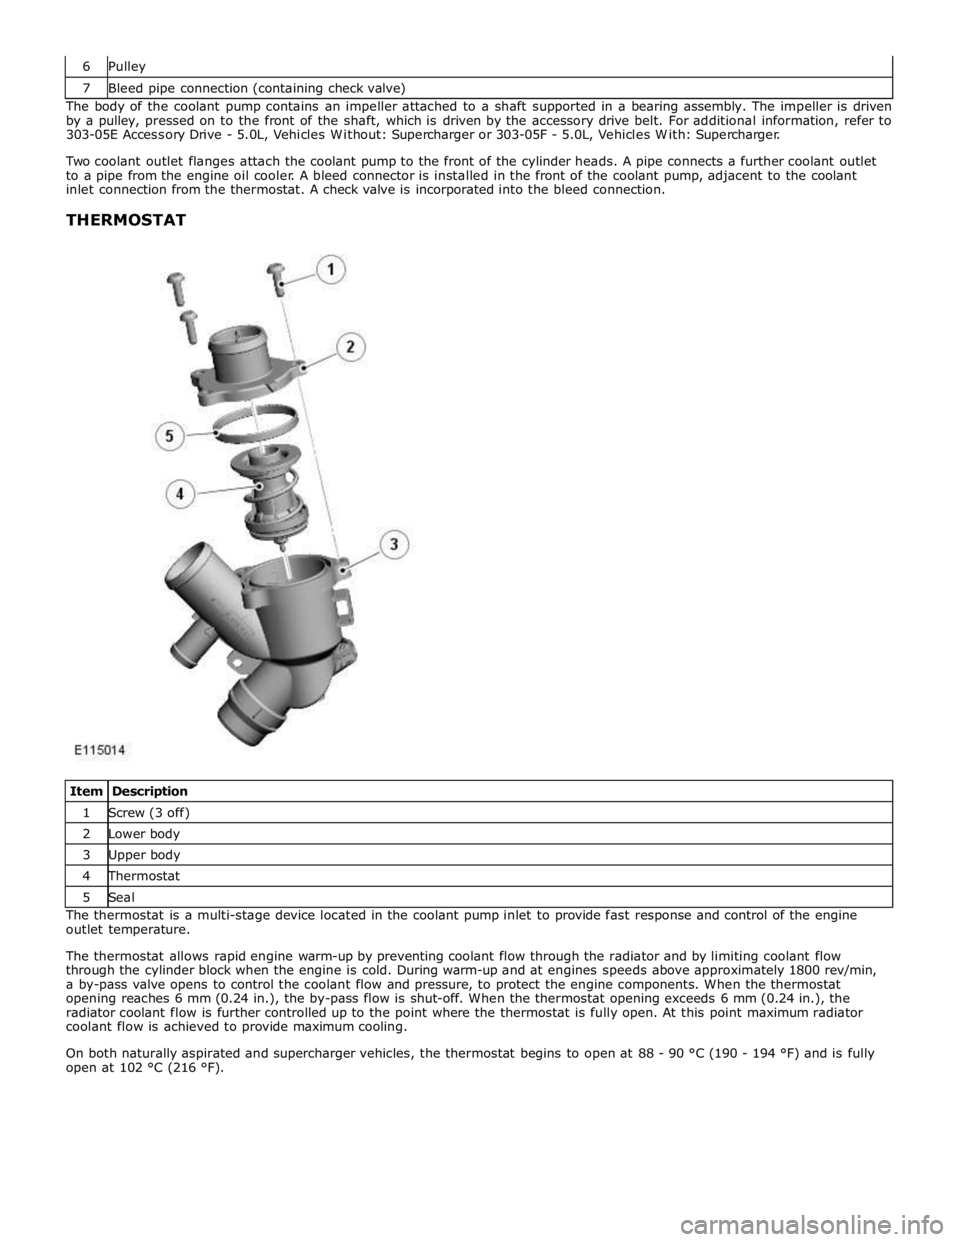 JAGUAR XFR 2010 1.G User Guide 7 Bleed pipe connection (containing check valve) The body of the coolant pump contains an impeller attached to a shaft supported in a bearing assembly. The impeller is driven 
by a pulley, pressed on 